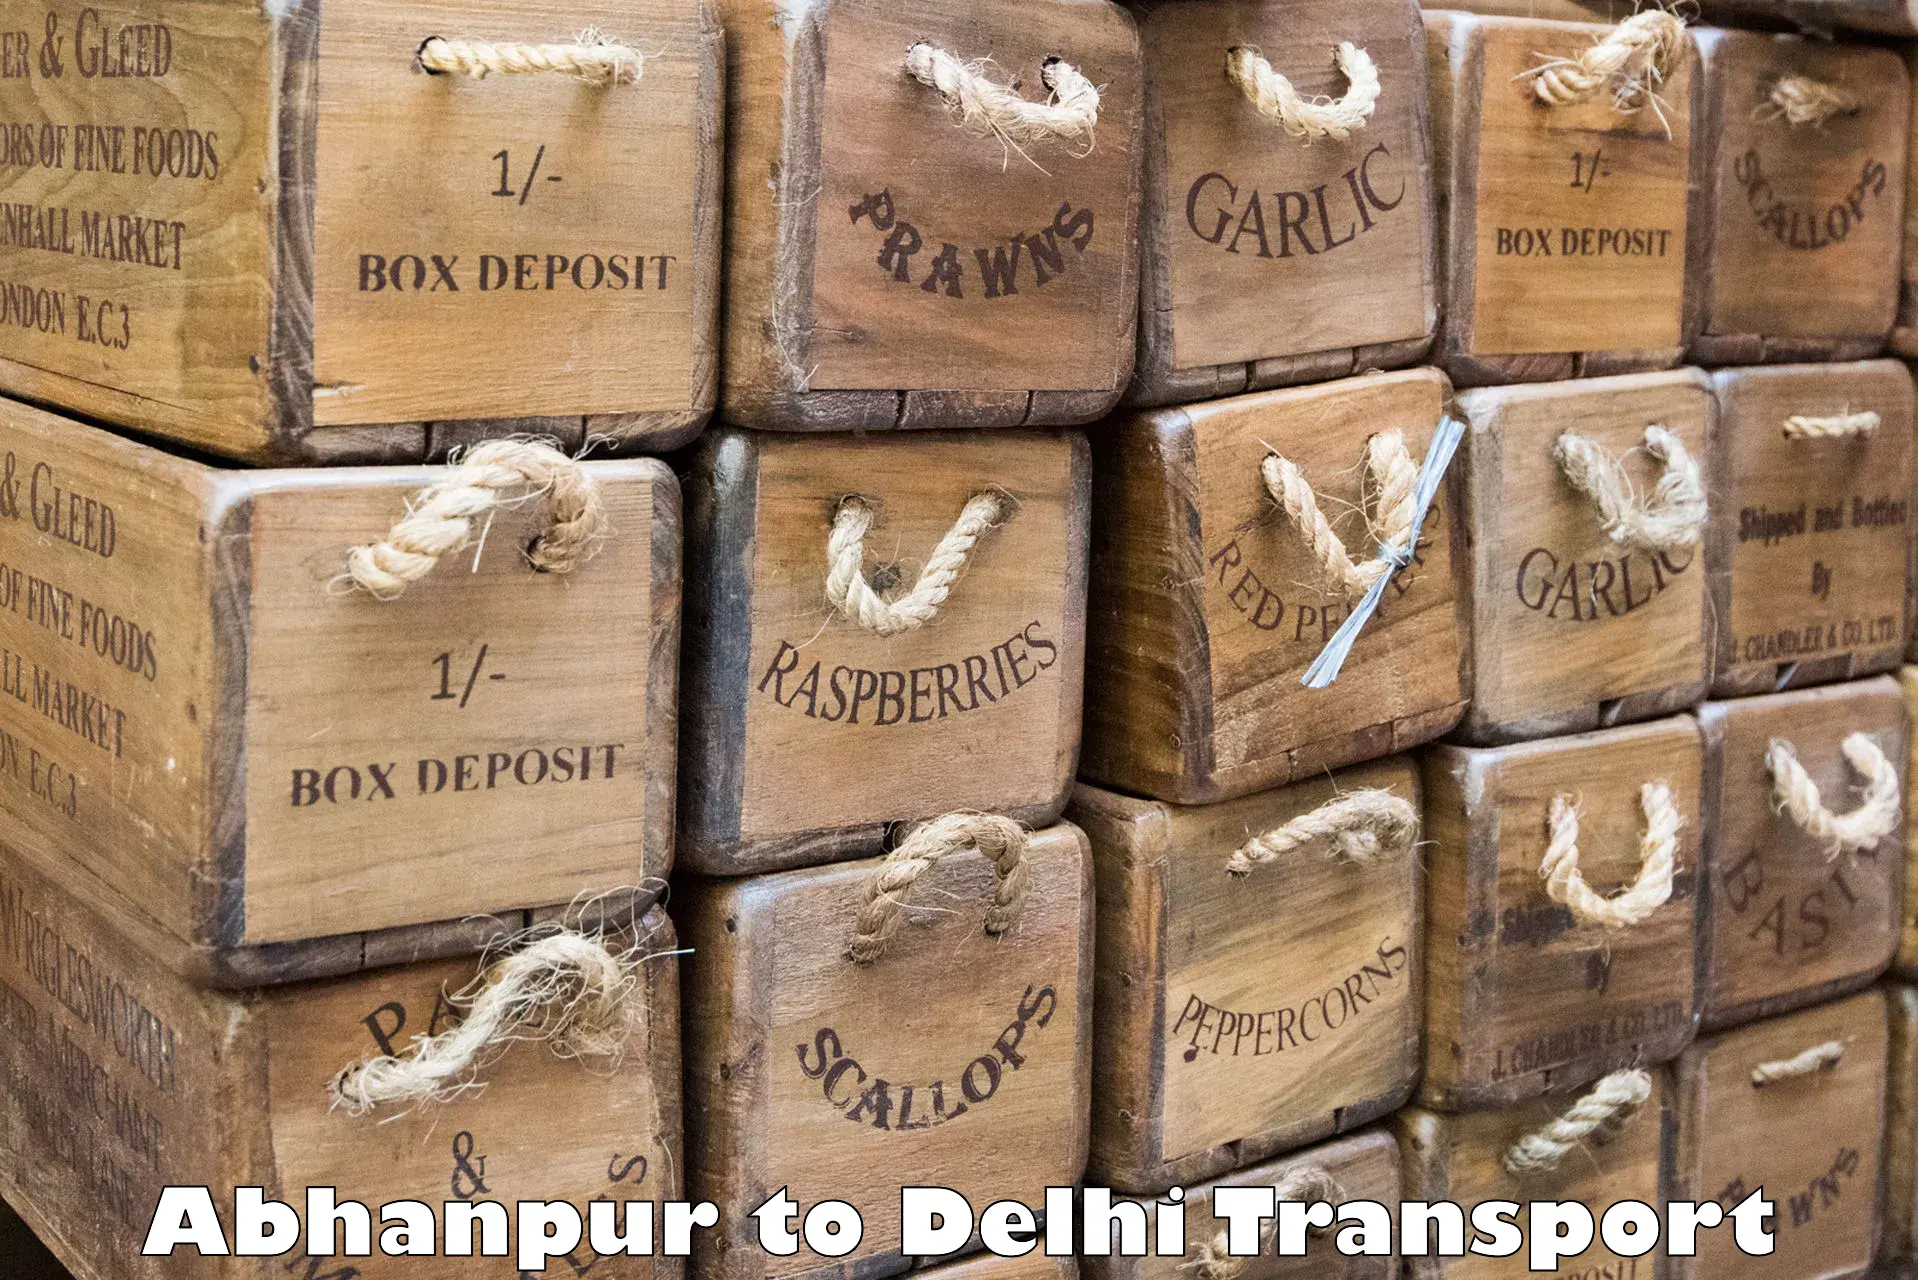 Express transport services Abhanpur to Lodhi Road